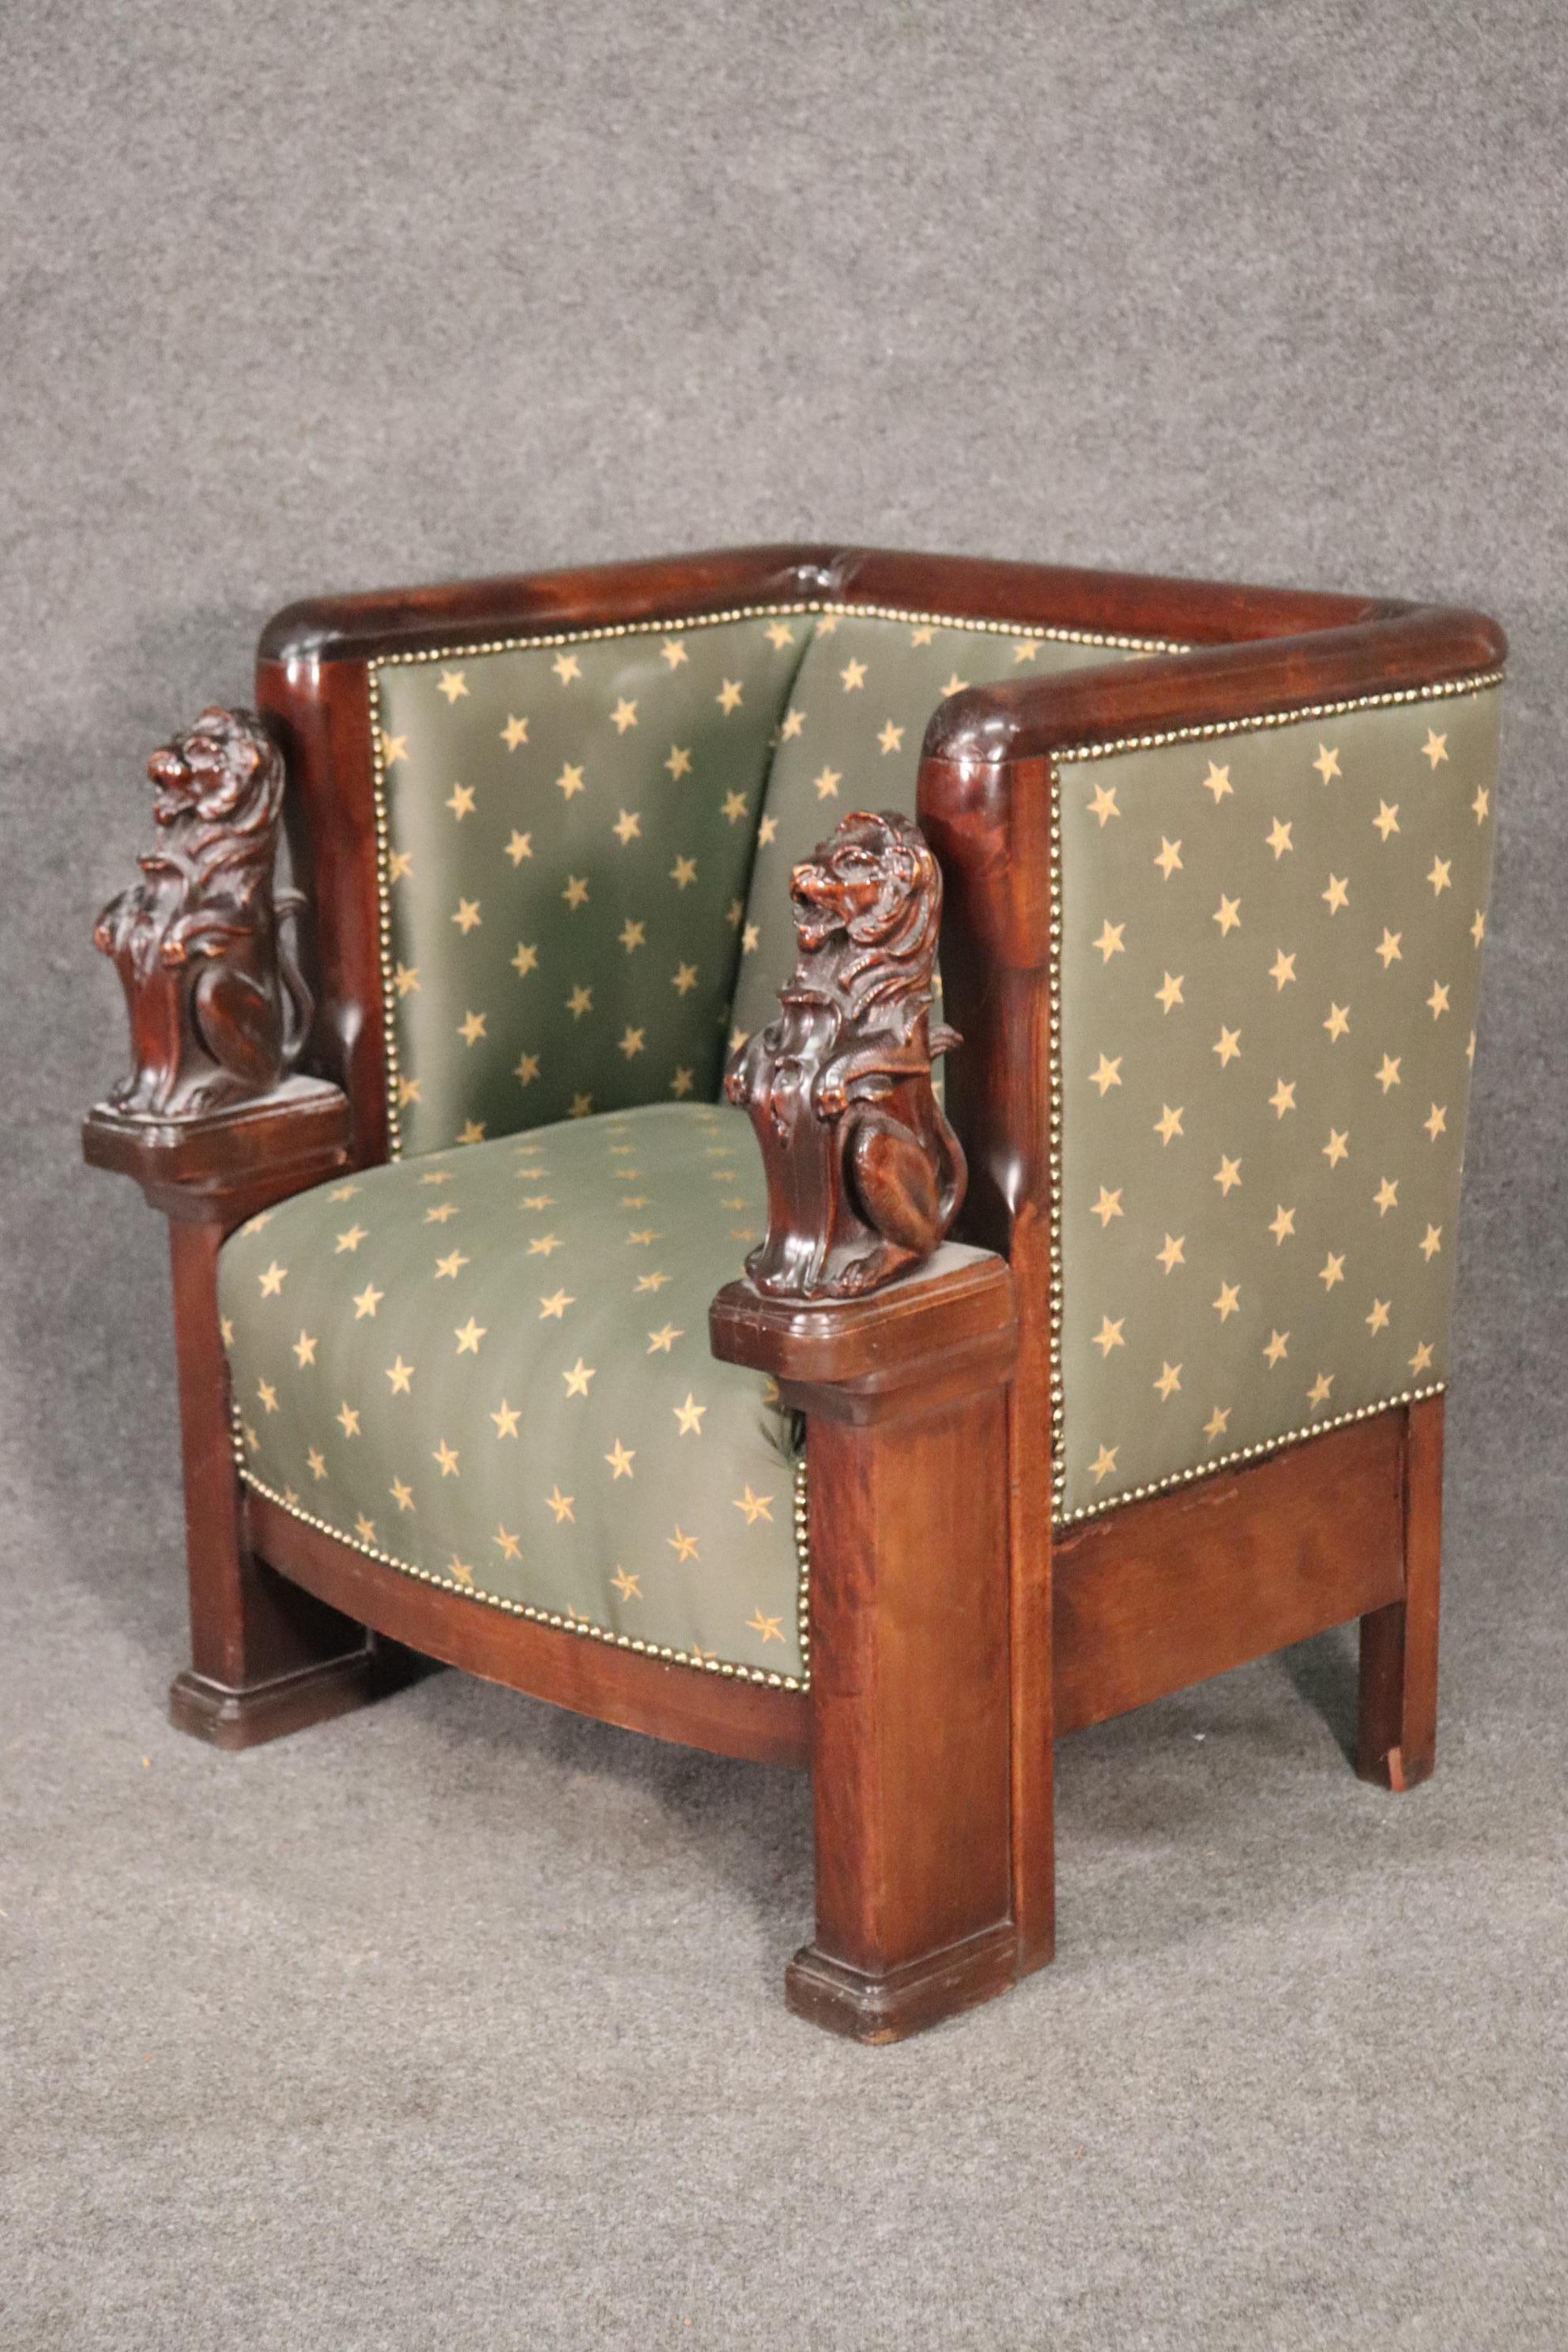 Fantastic Pair Carved Magogany Full Standing Lion French Empire Chairs 1